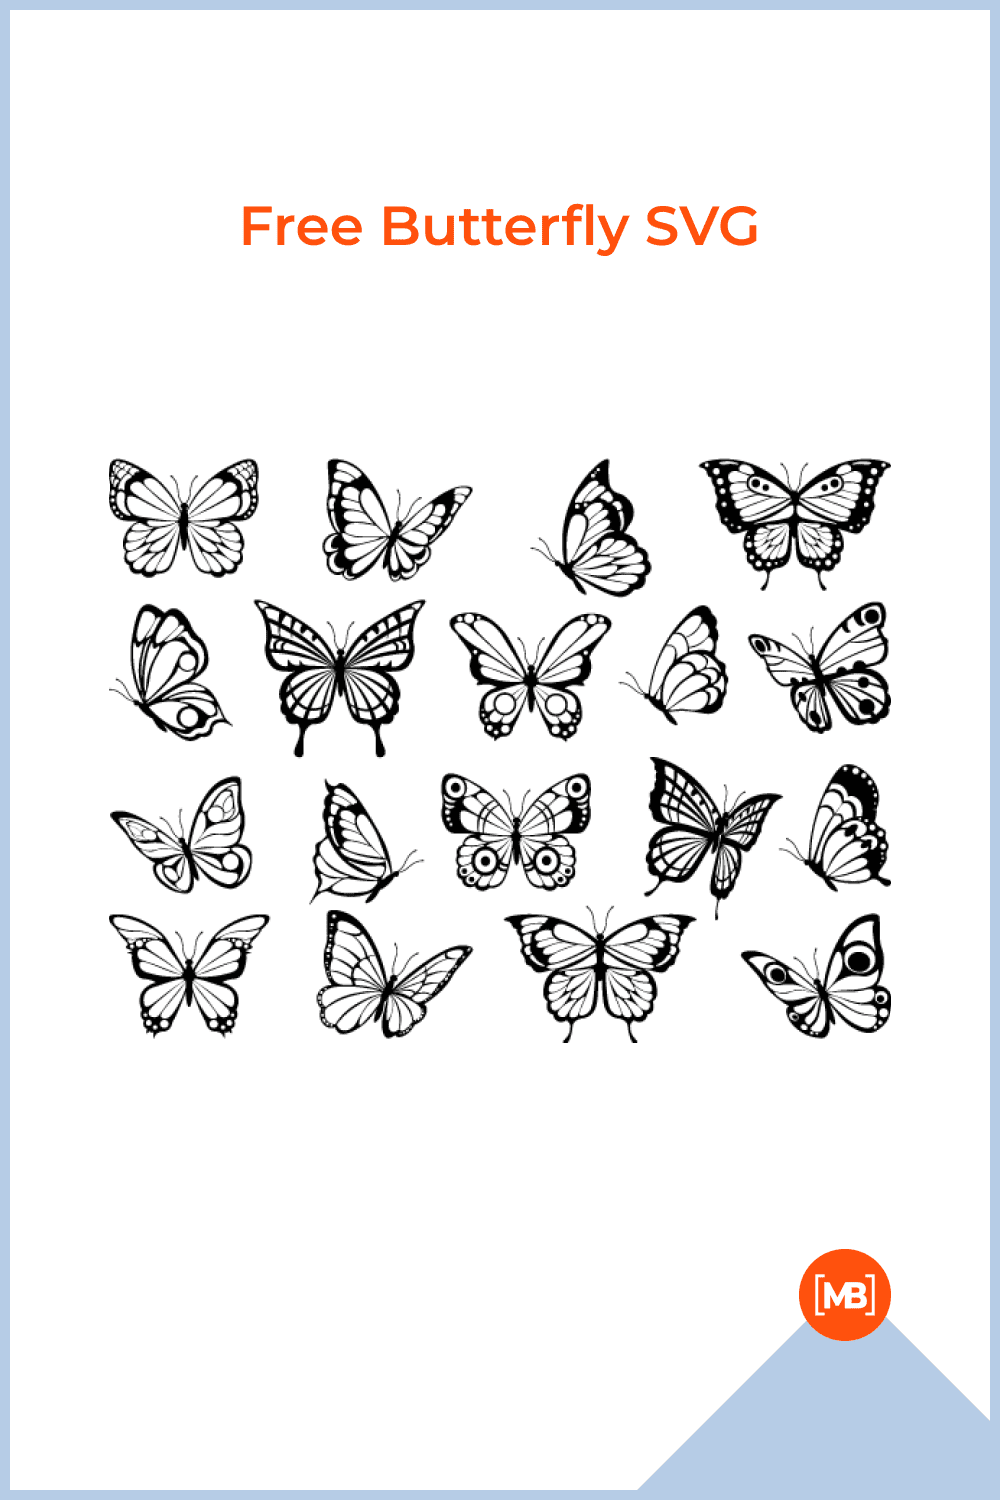 Free Butterfly SVG.